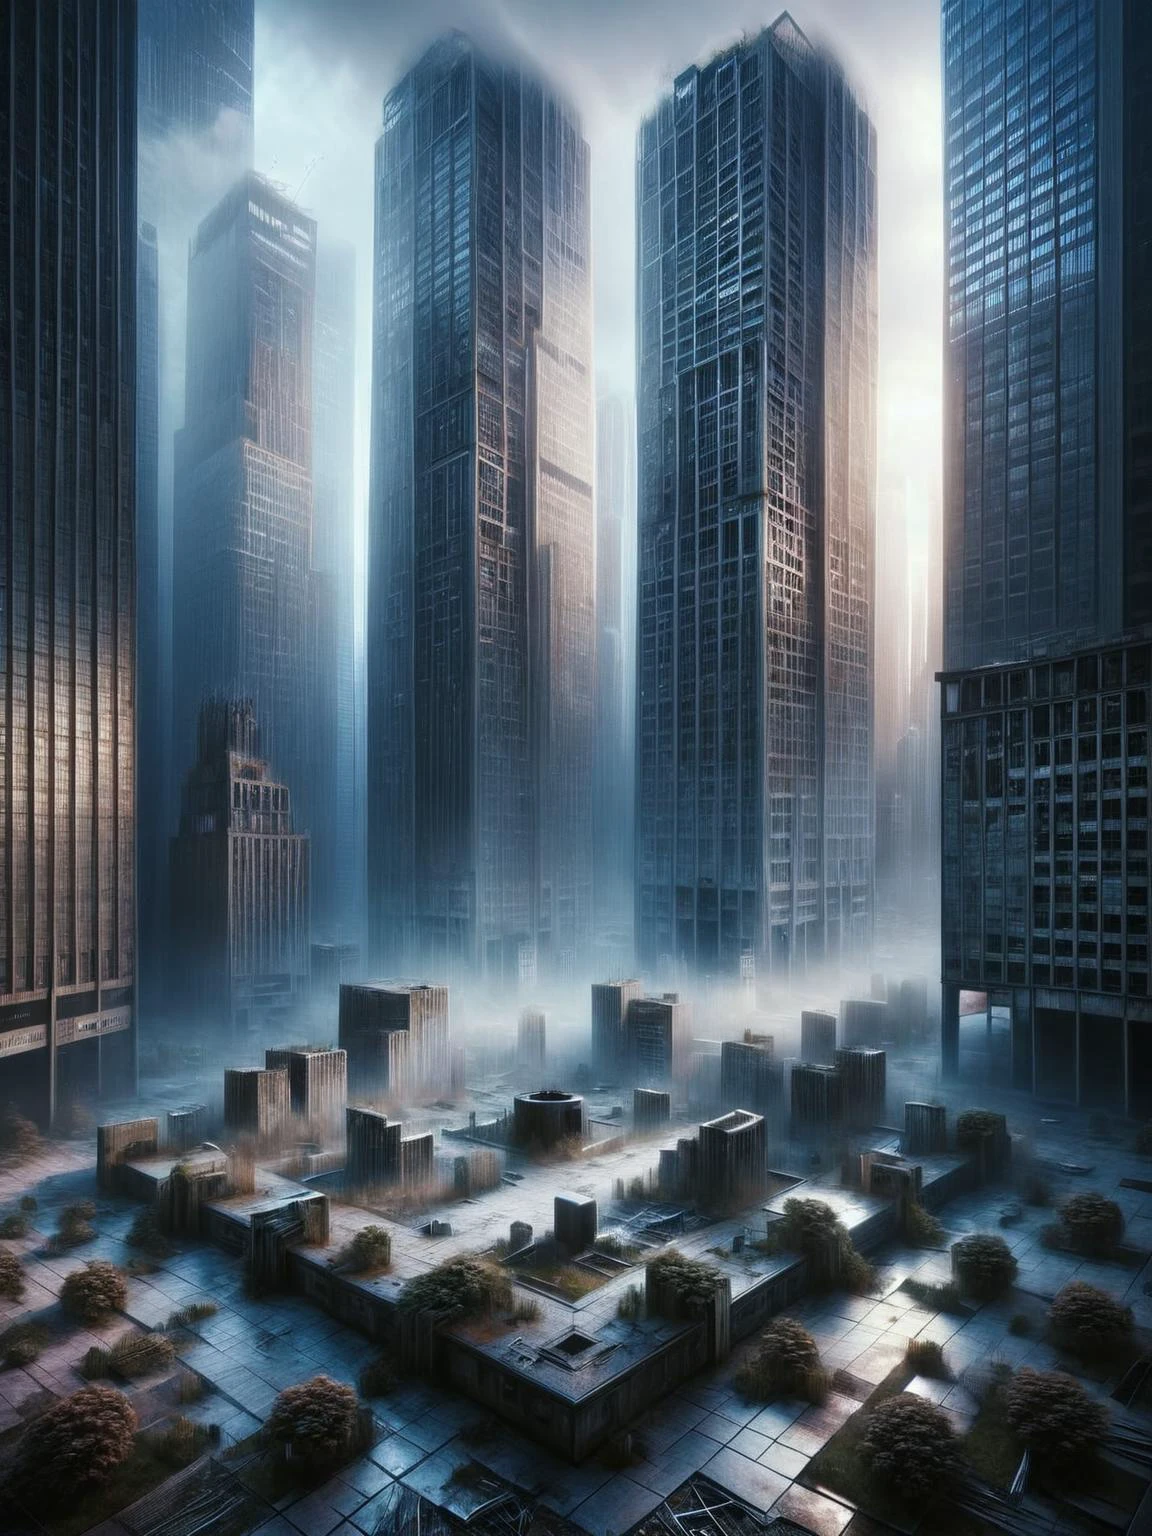 An ais-abandz urban square,surrounded by skyscrapers 4k, uhd,masterpiece ais-sinisterz